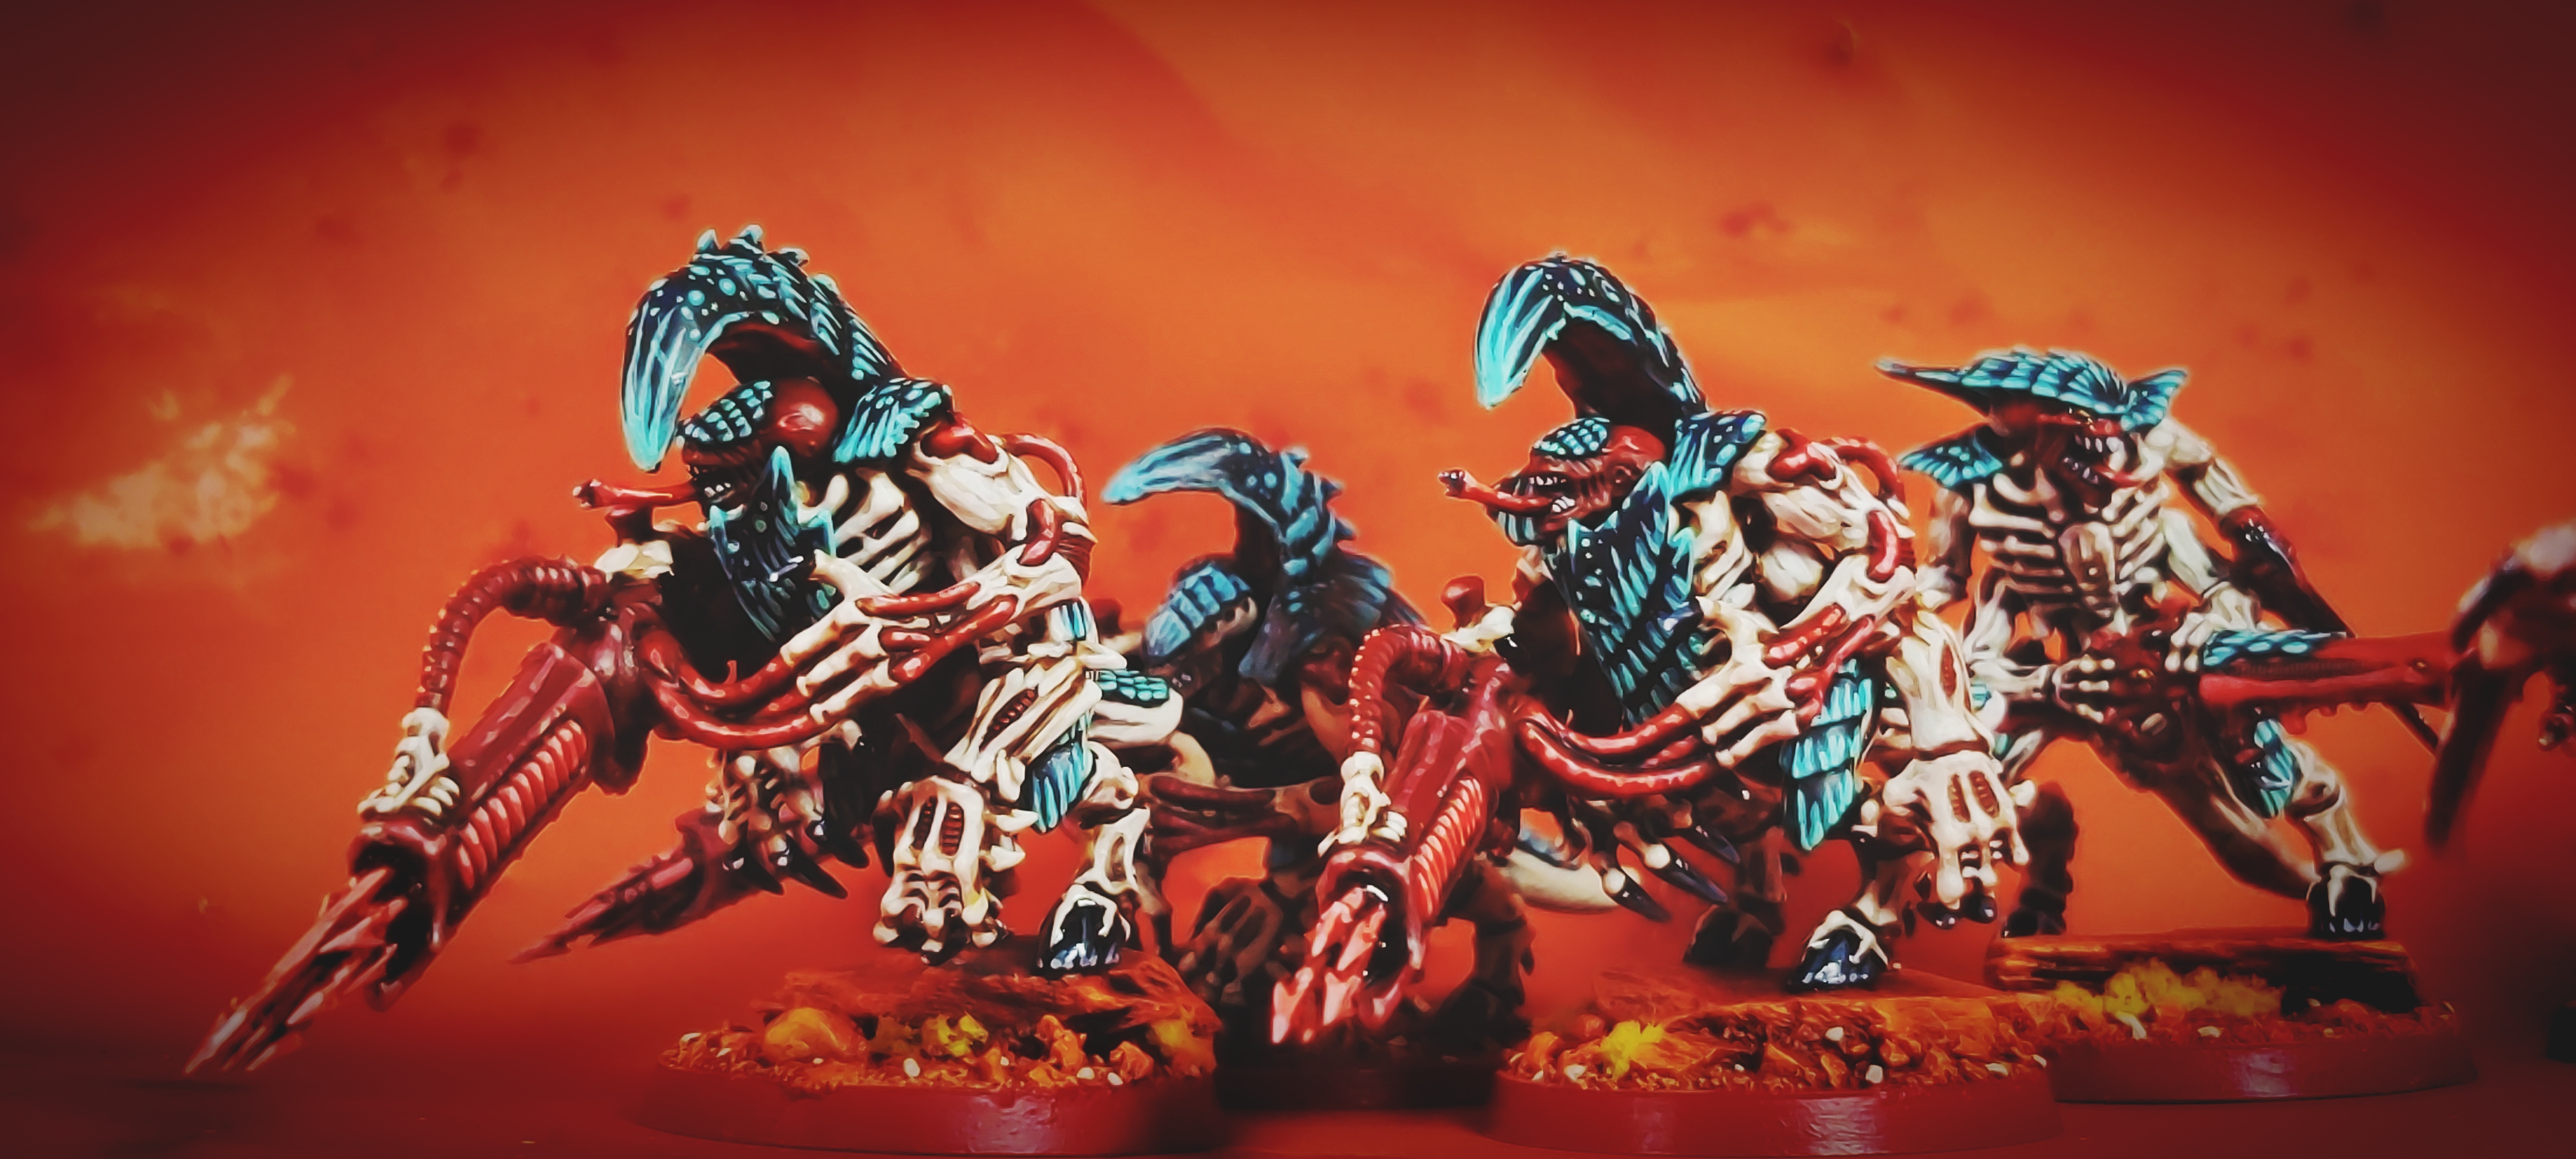 Warhammer 40K's new edition sets the Tyranids up as the prime